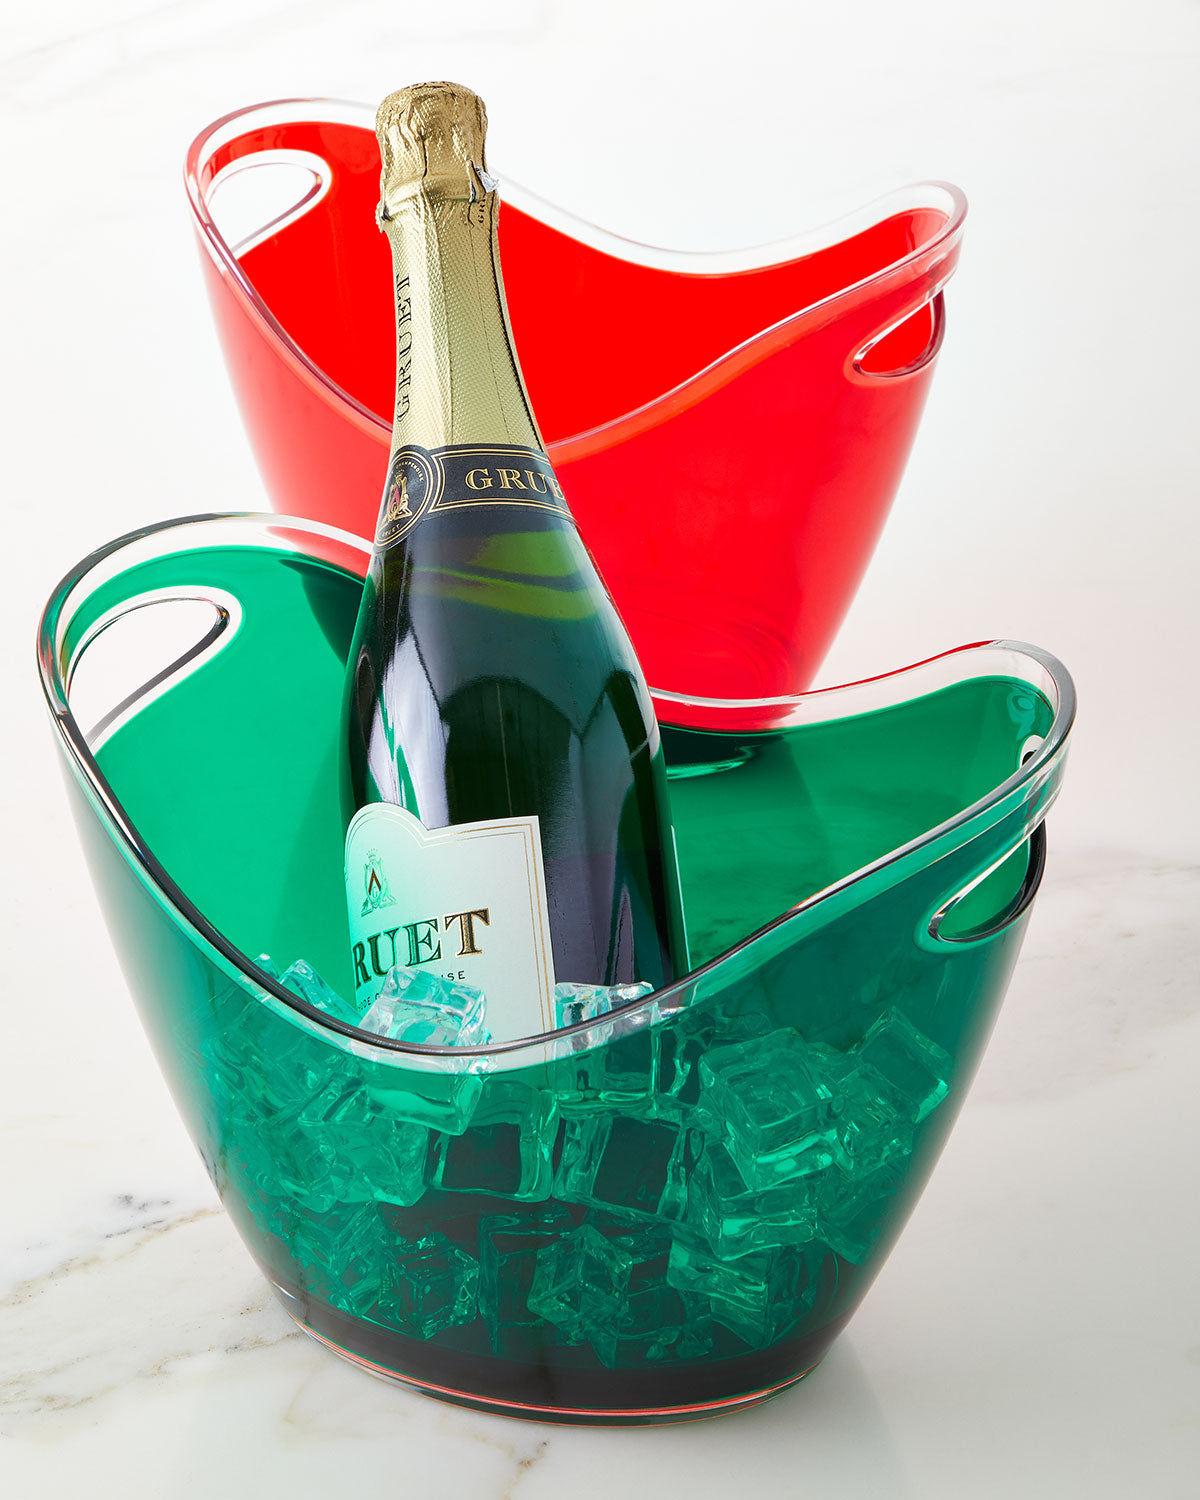 Culla Small Red Champagne Basket